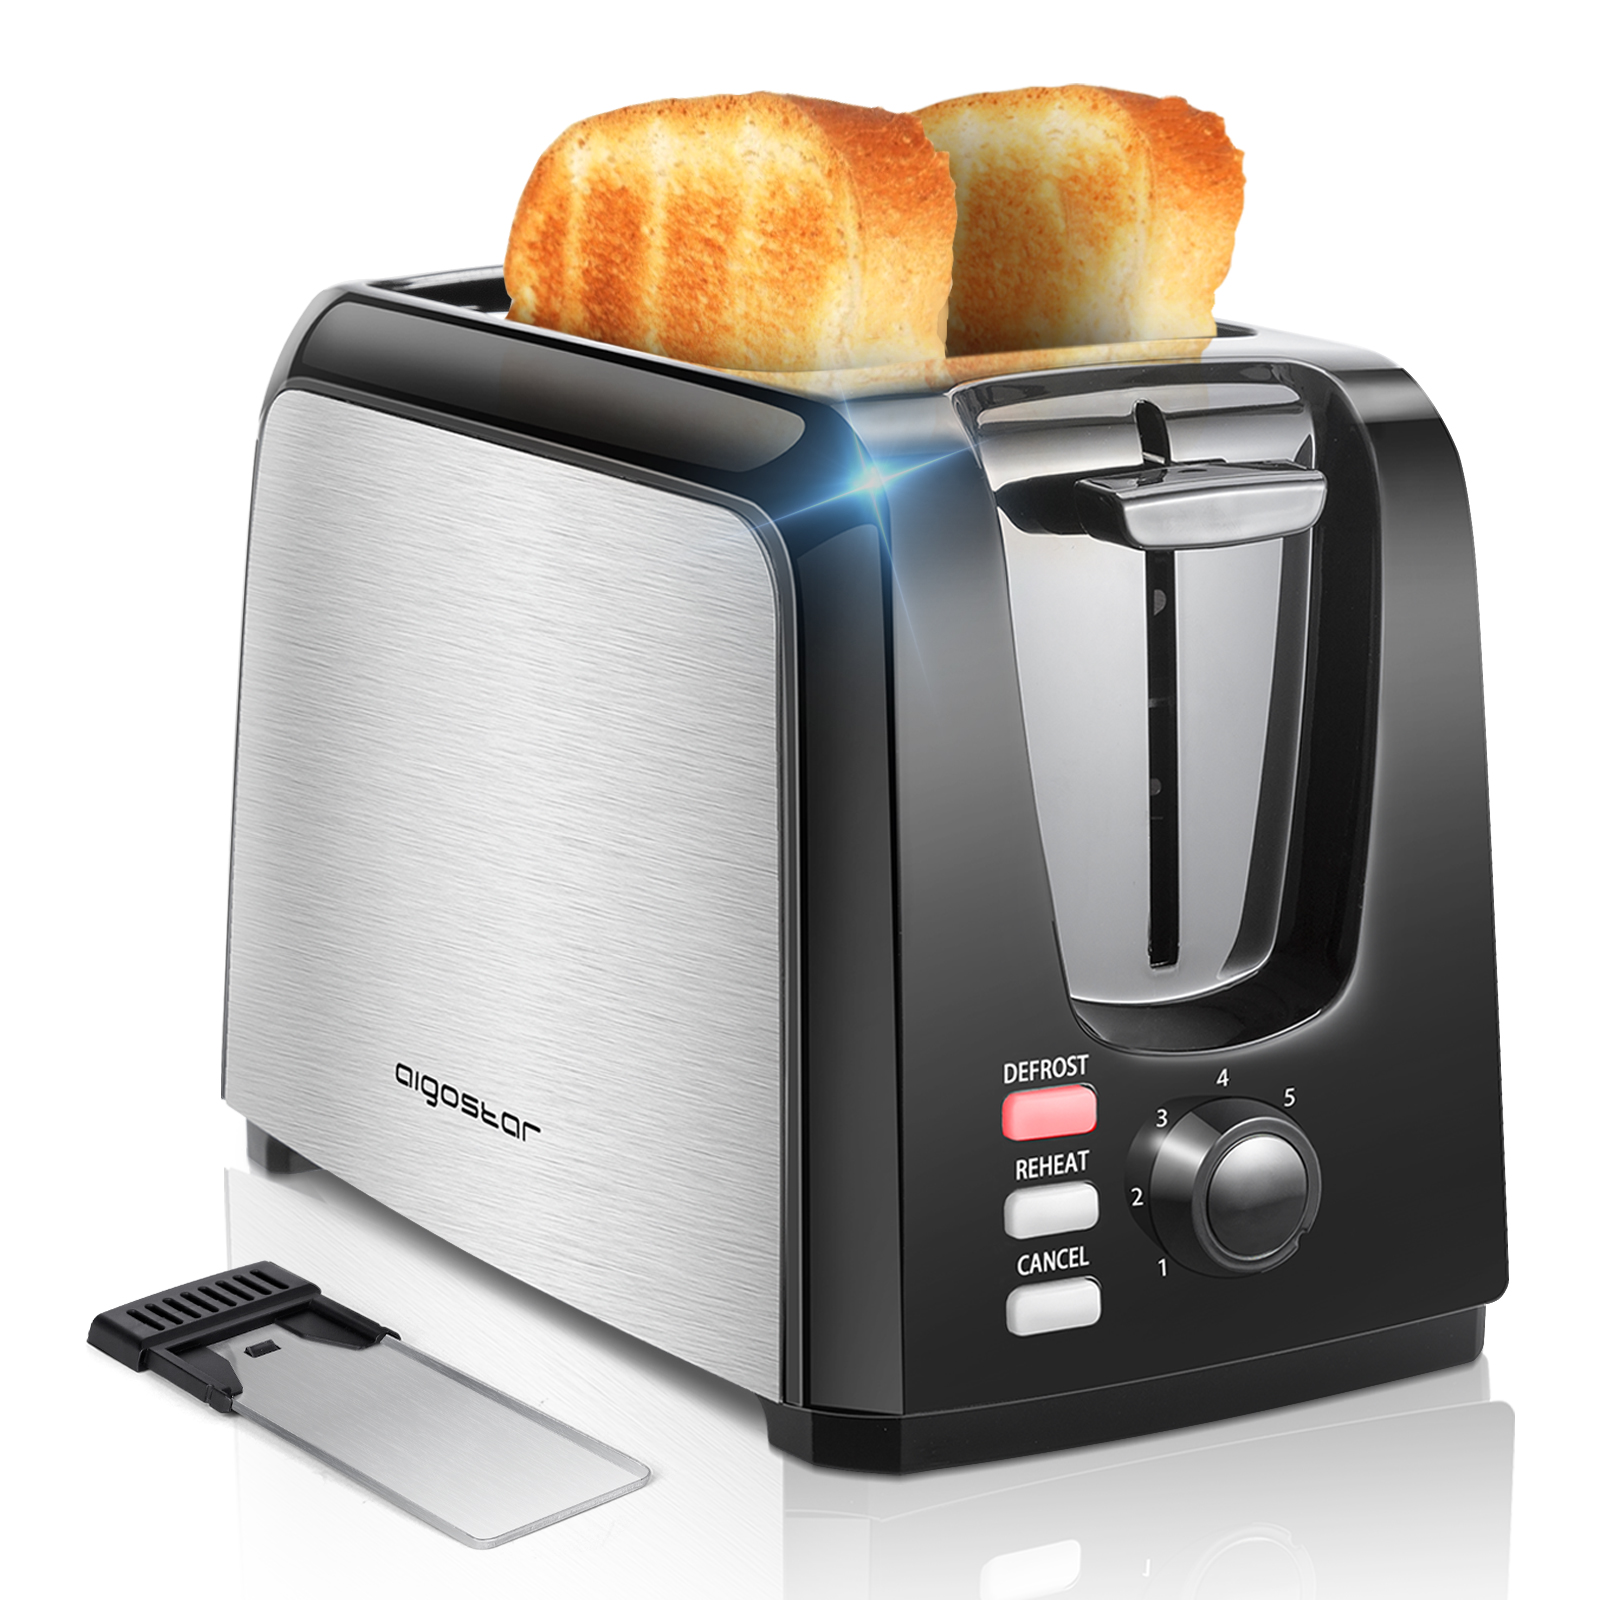 Toaster 2 Slice Stainless Steel Best Prime Bagel Toaster Evenly and Quickly with Two Wide Slots 7 Shade Settings and Removable Crumb Tray for Bread Waffles 